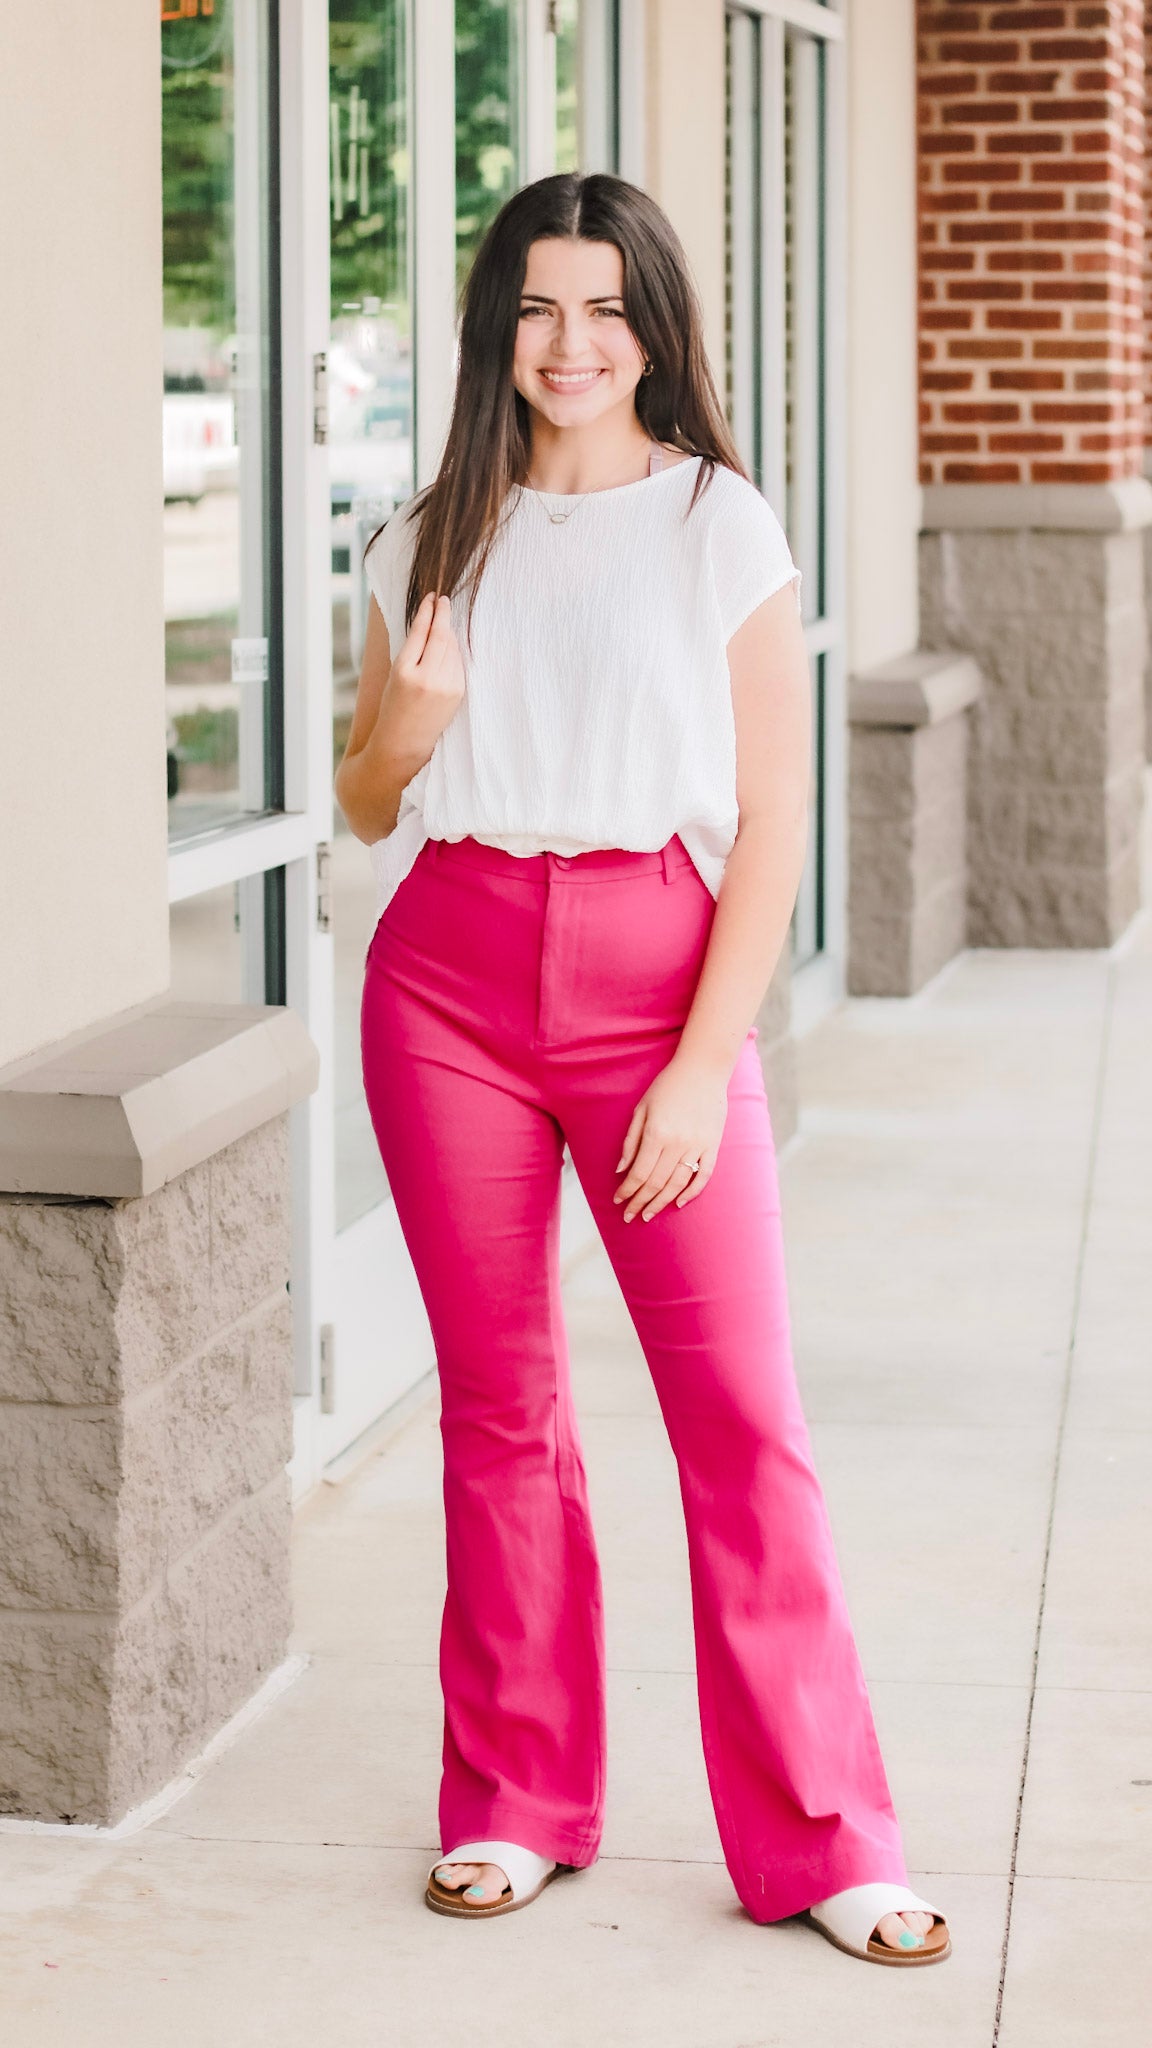 Making Moves Hot Pink Flares - Allure Clothing Boutique